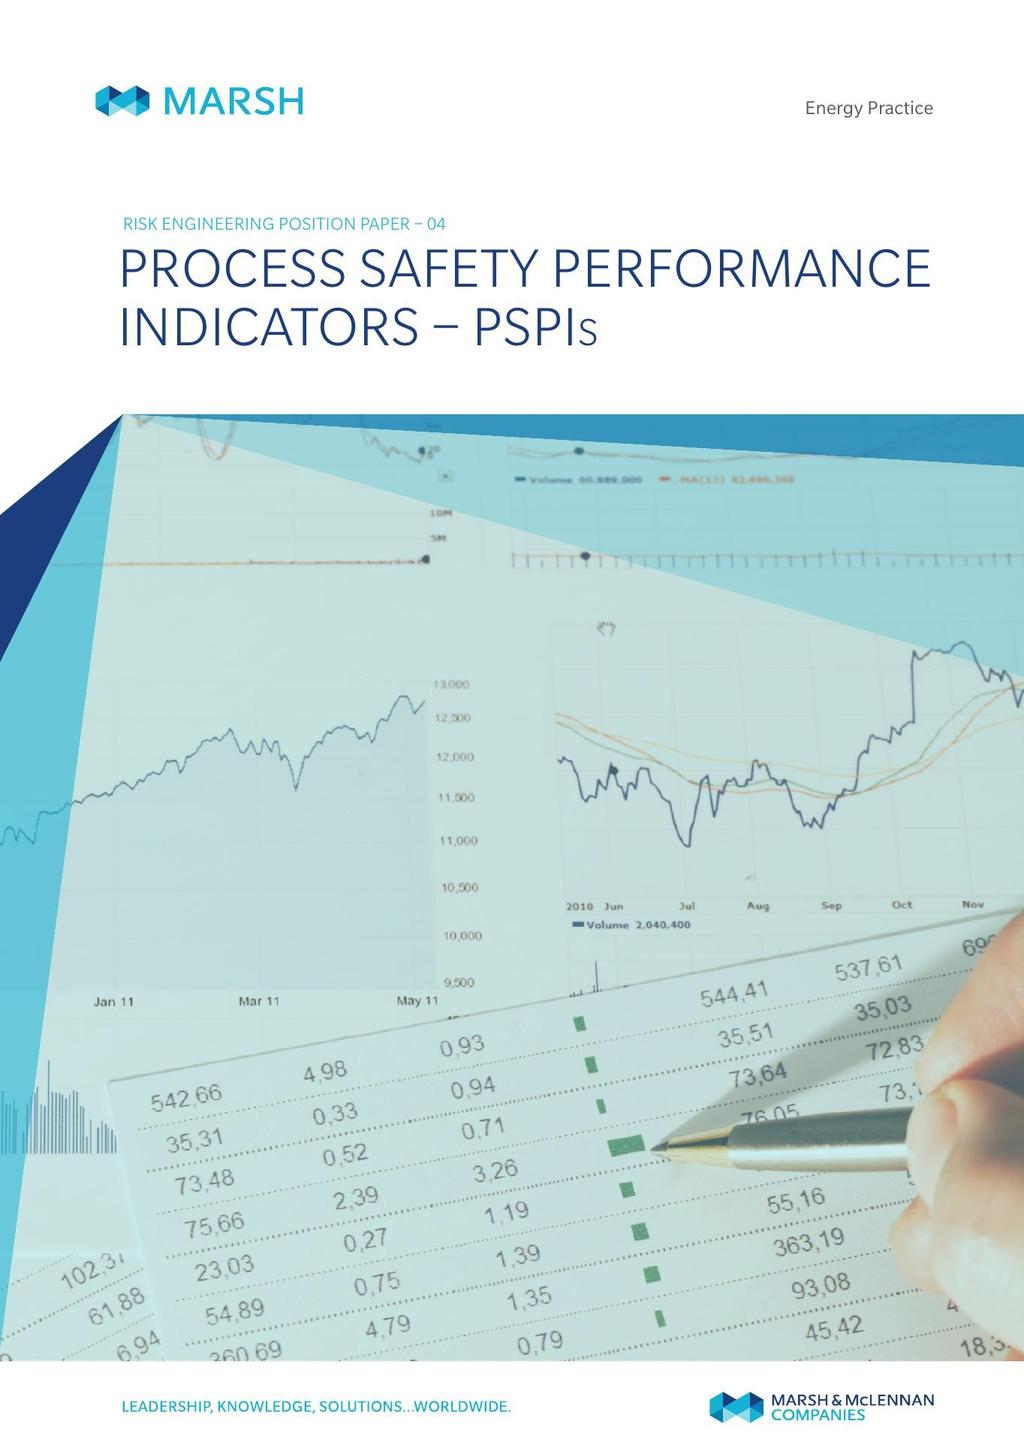 Main Reference(s) Marsh Energy Practice Process Safety Performance Indicators - PSPIs Risk